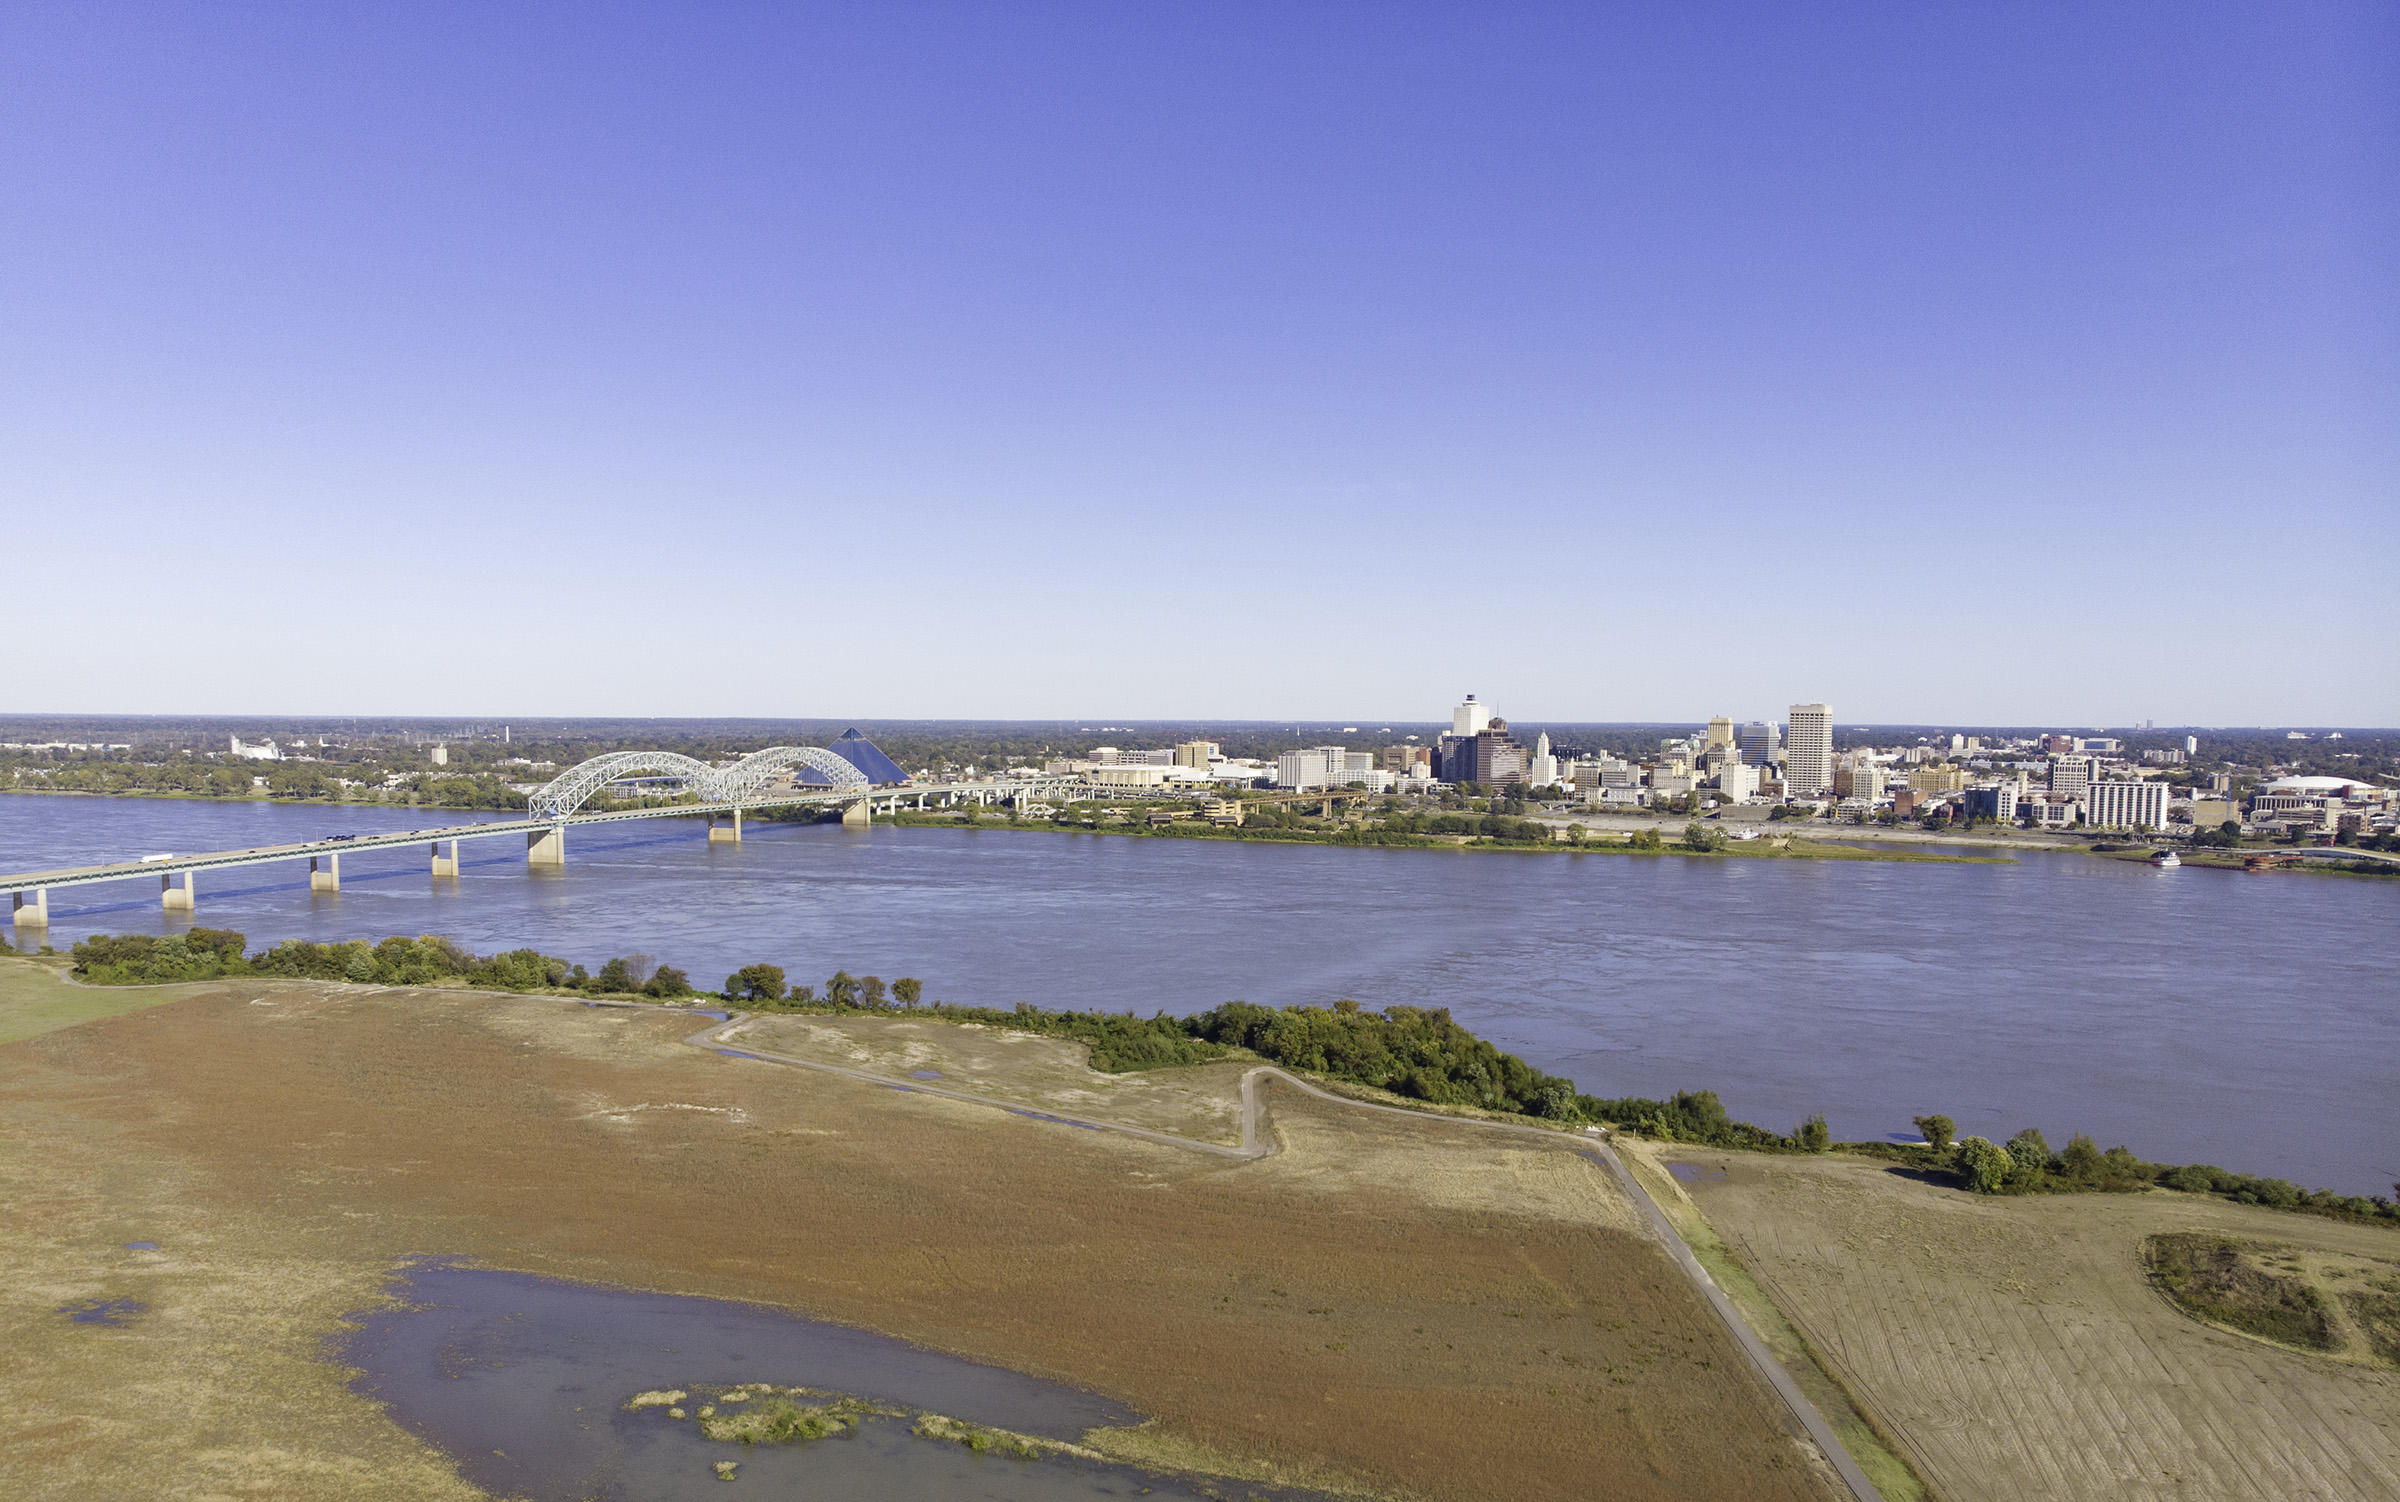 The Mississippi River, with Memphis, Tennessee in the background. (Getty Images/iStockphoto)